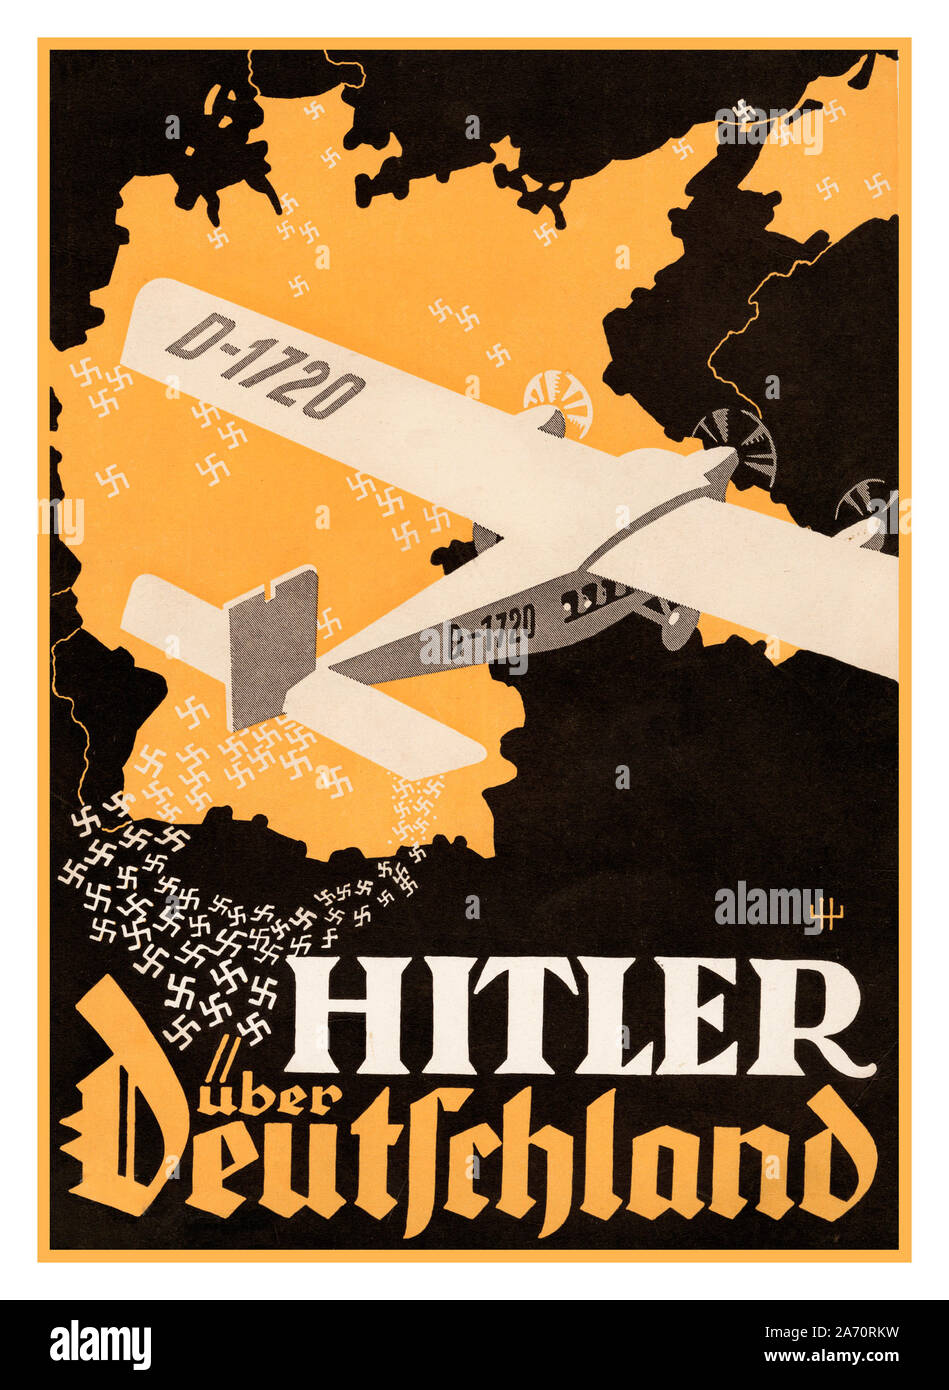 1930’s Nazi Propaganda HITLER OVER GERMANY cover illustration of a political propaganda pamphlet celebrating Hitler’s “Flights Over Germany,” a series of airborne speeches that were successful for the Nazi Party in the 1932 German elections. Stock Photo